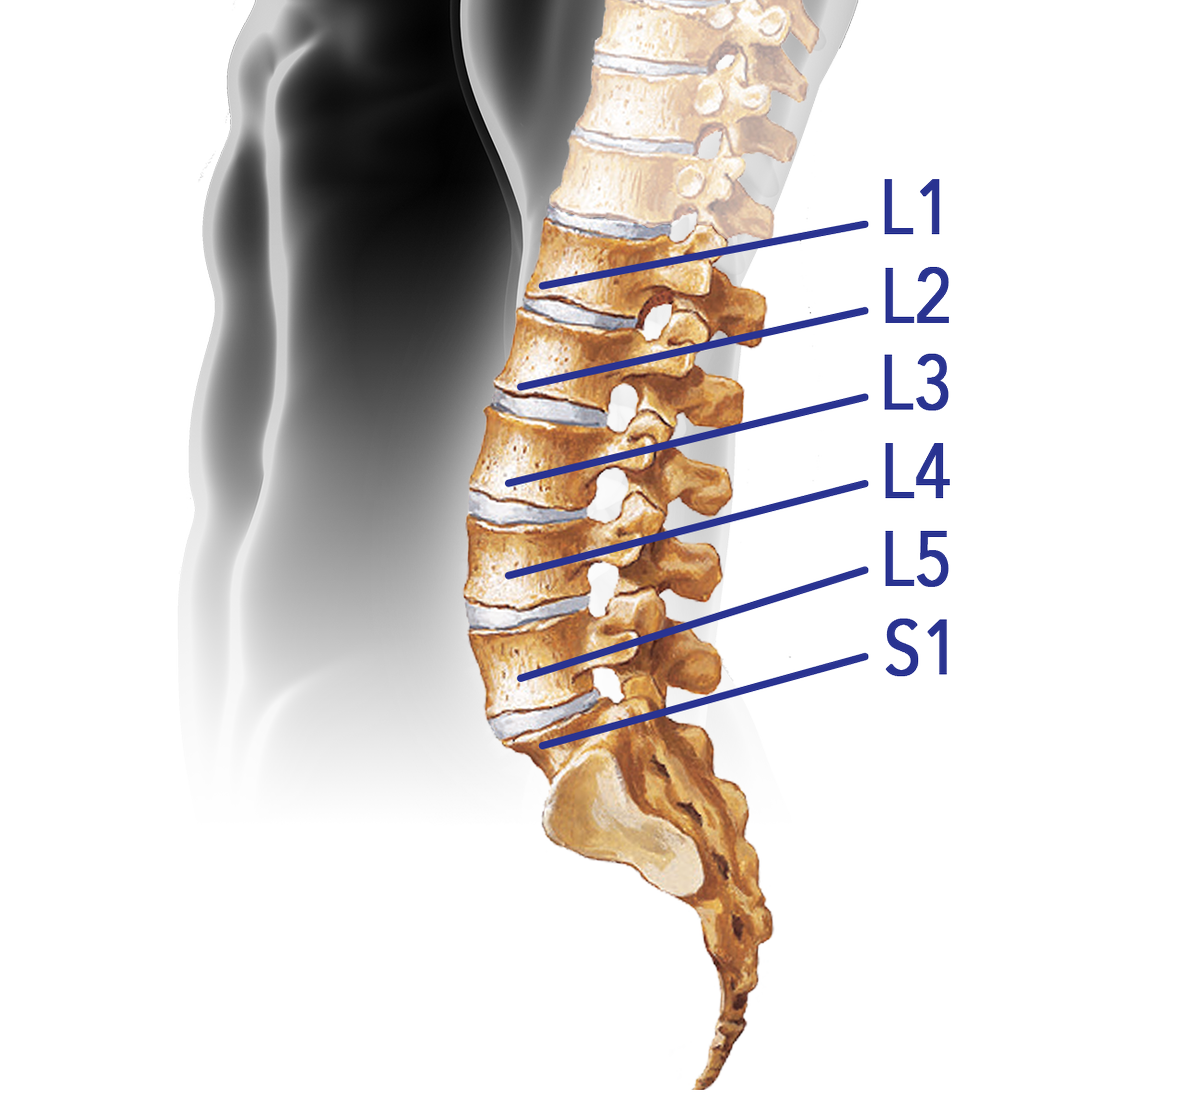 Understanding Spinal Conditions: From Lumbar Spondylosis to TLIF Surgery